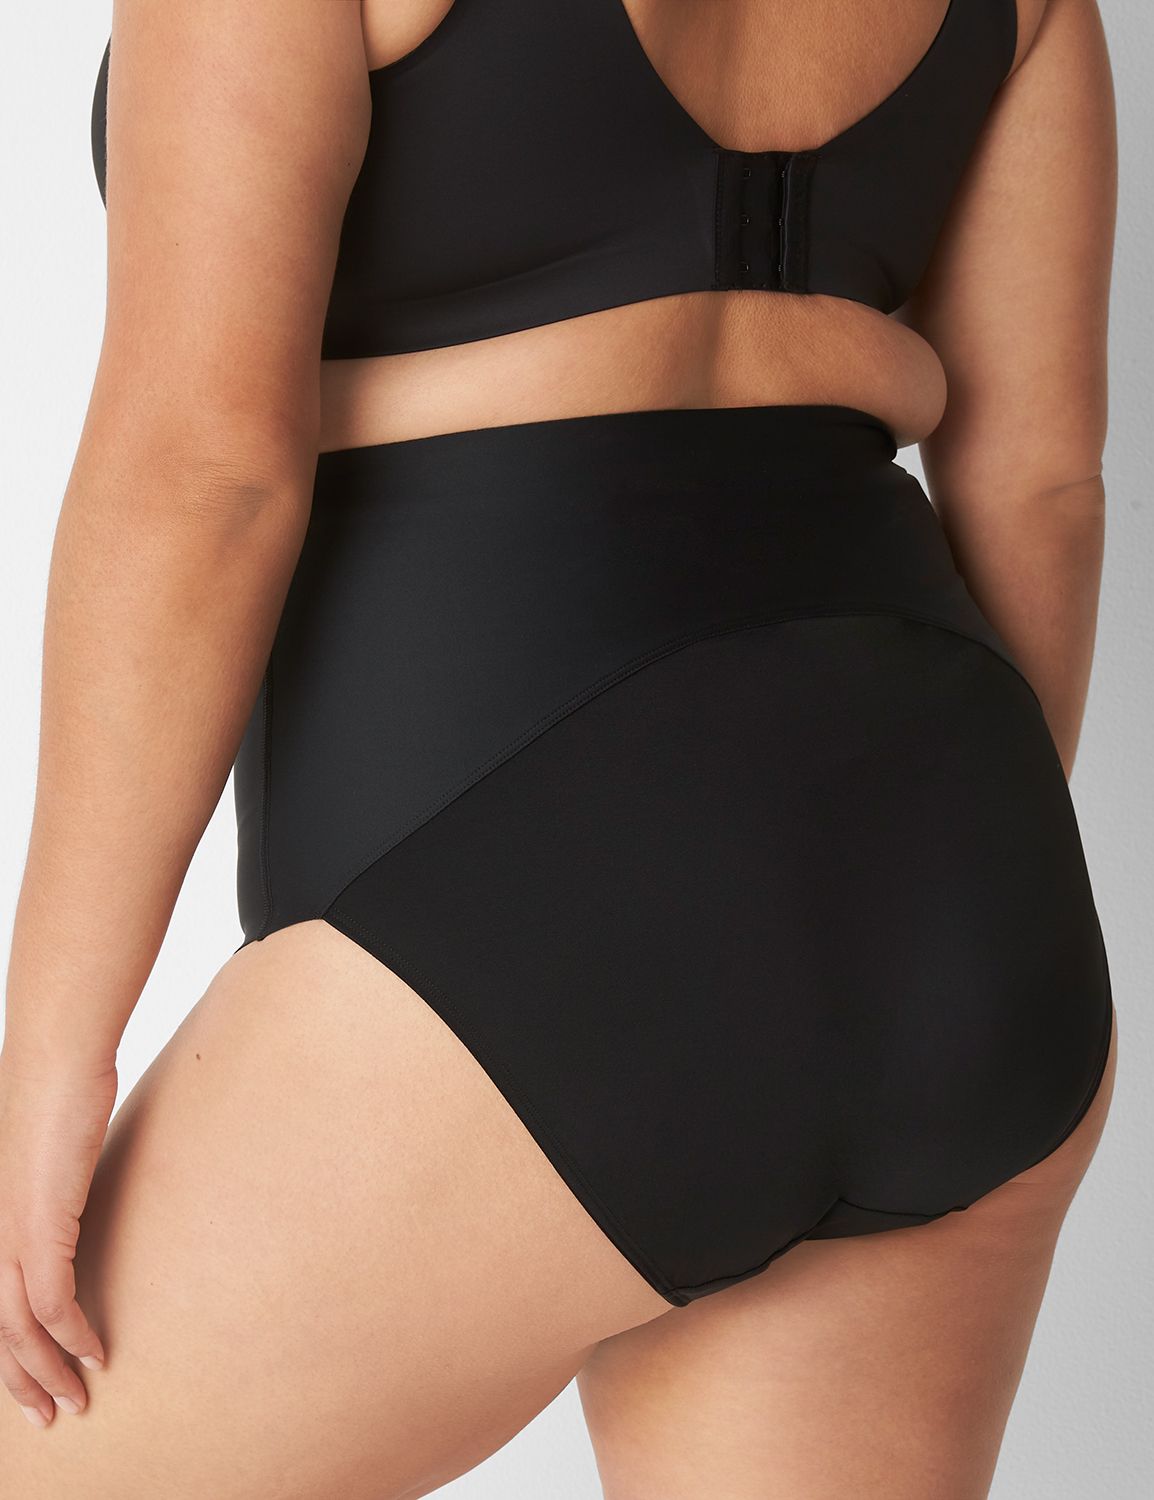 Level 2 Totally Smooth Ultra High-Waist Brief Panty